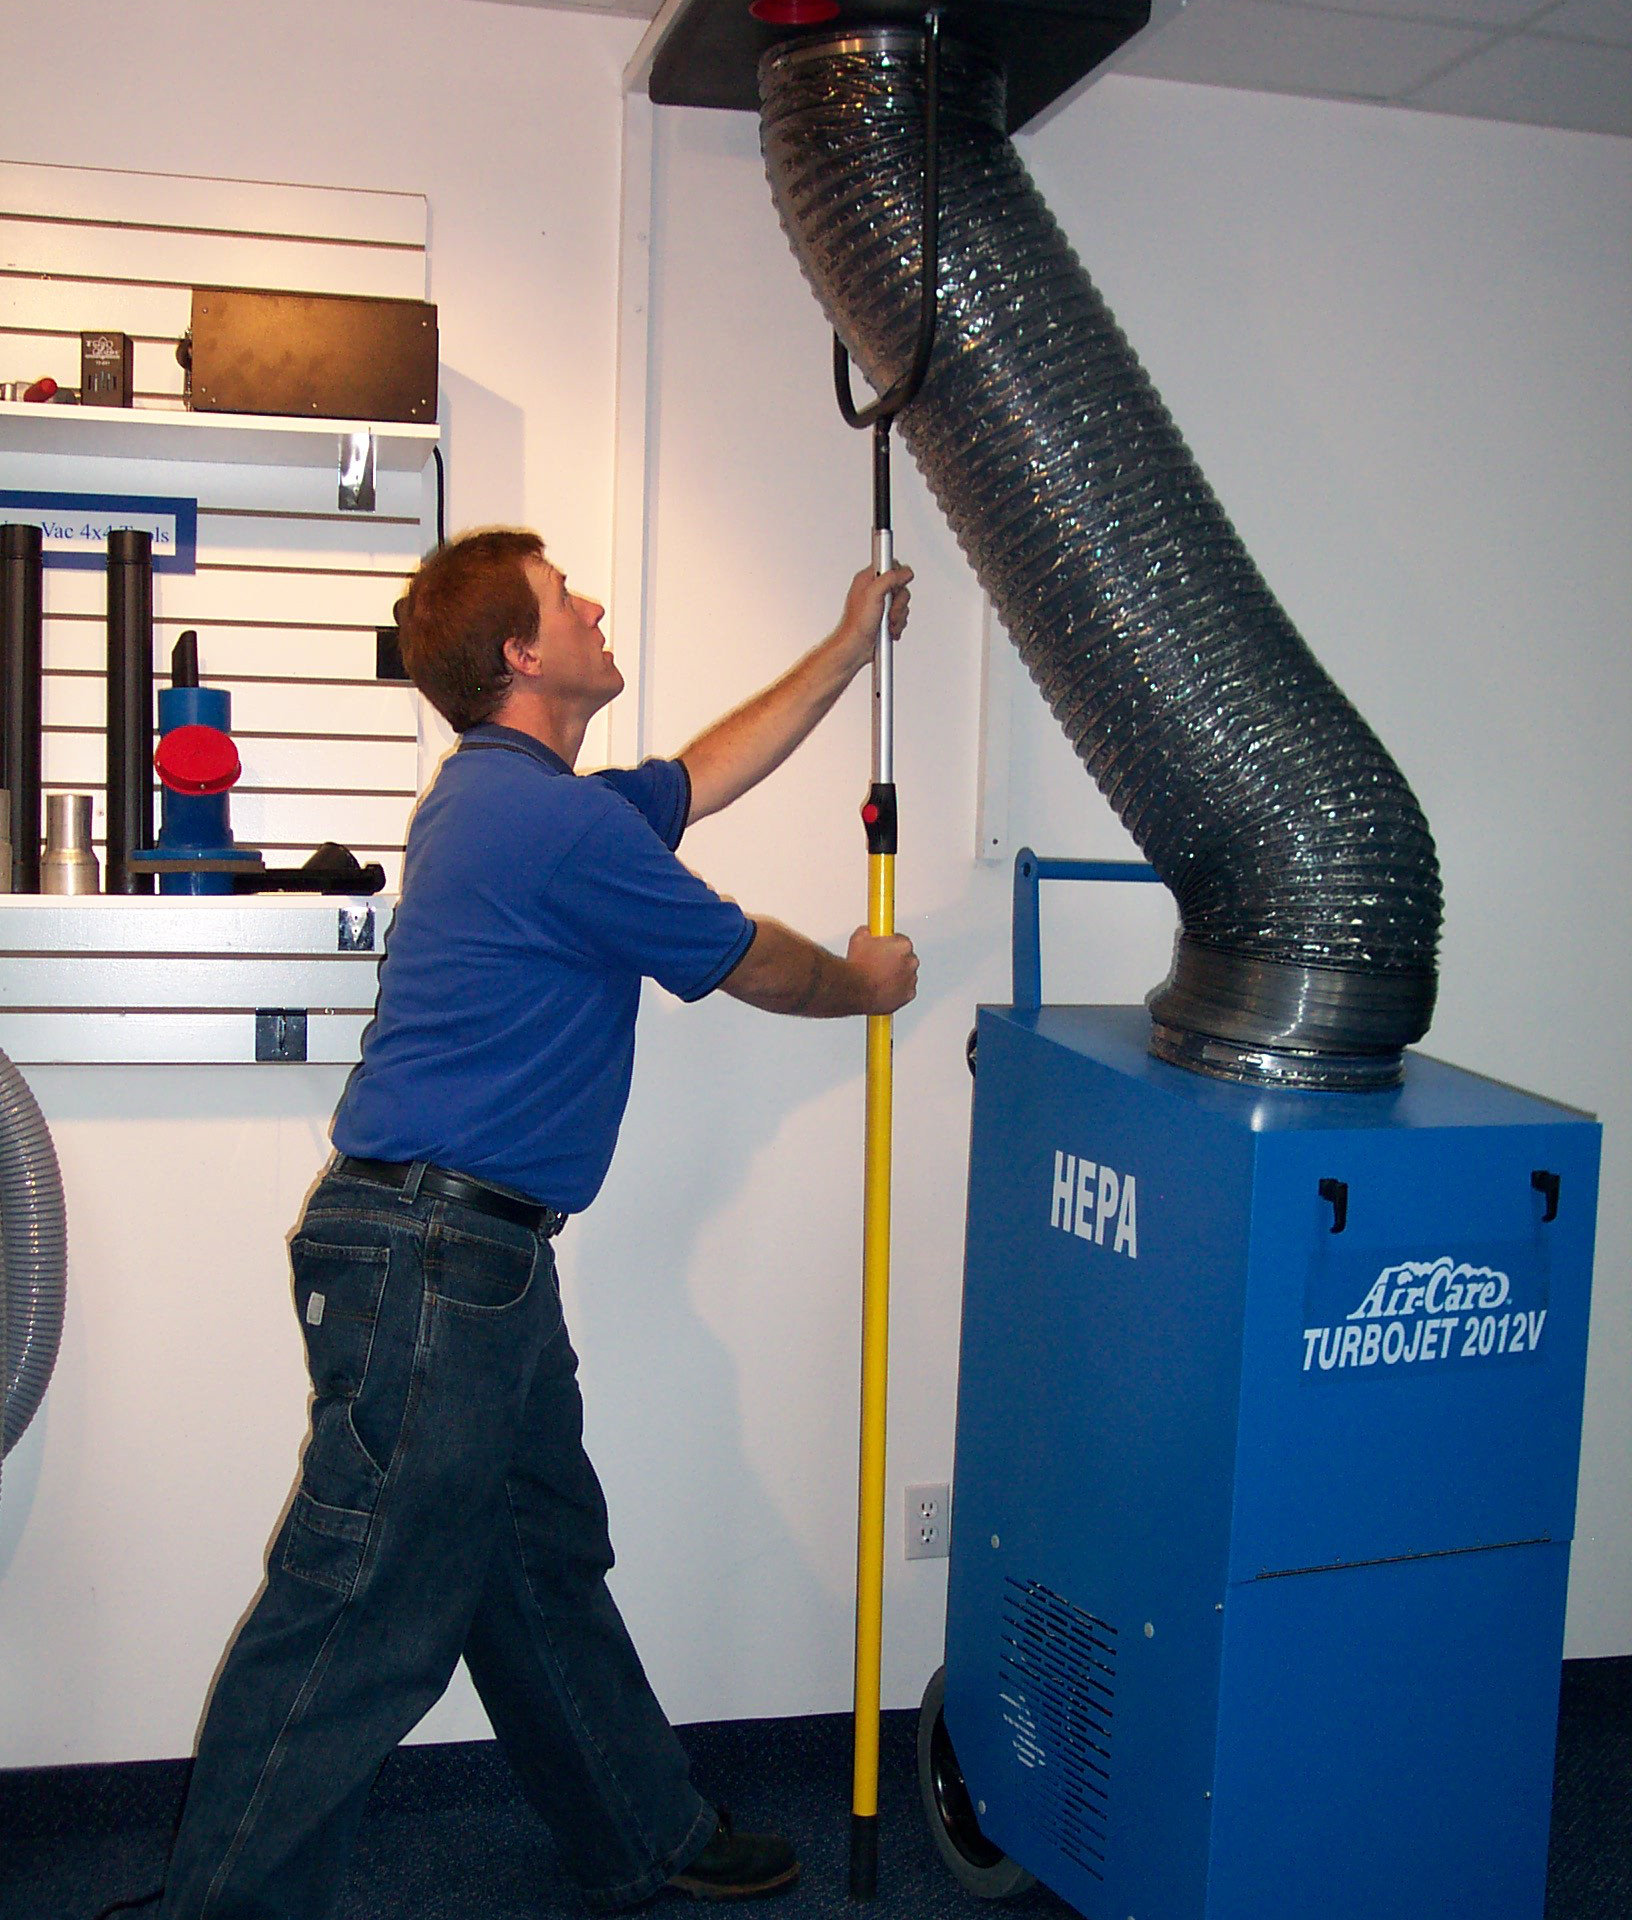 Air Duct Cleaning, Repairs, and Installation - Sky clean Air